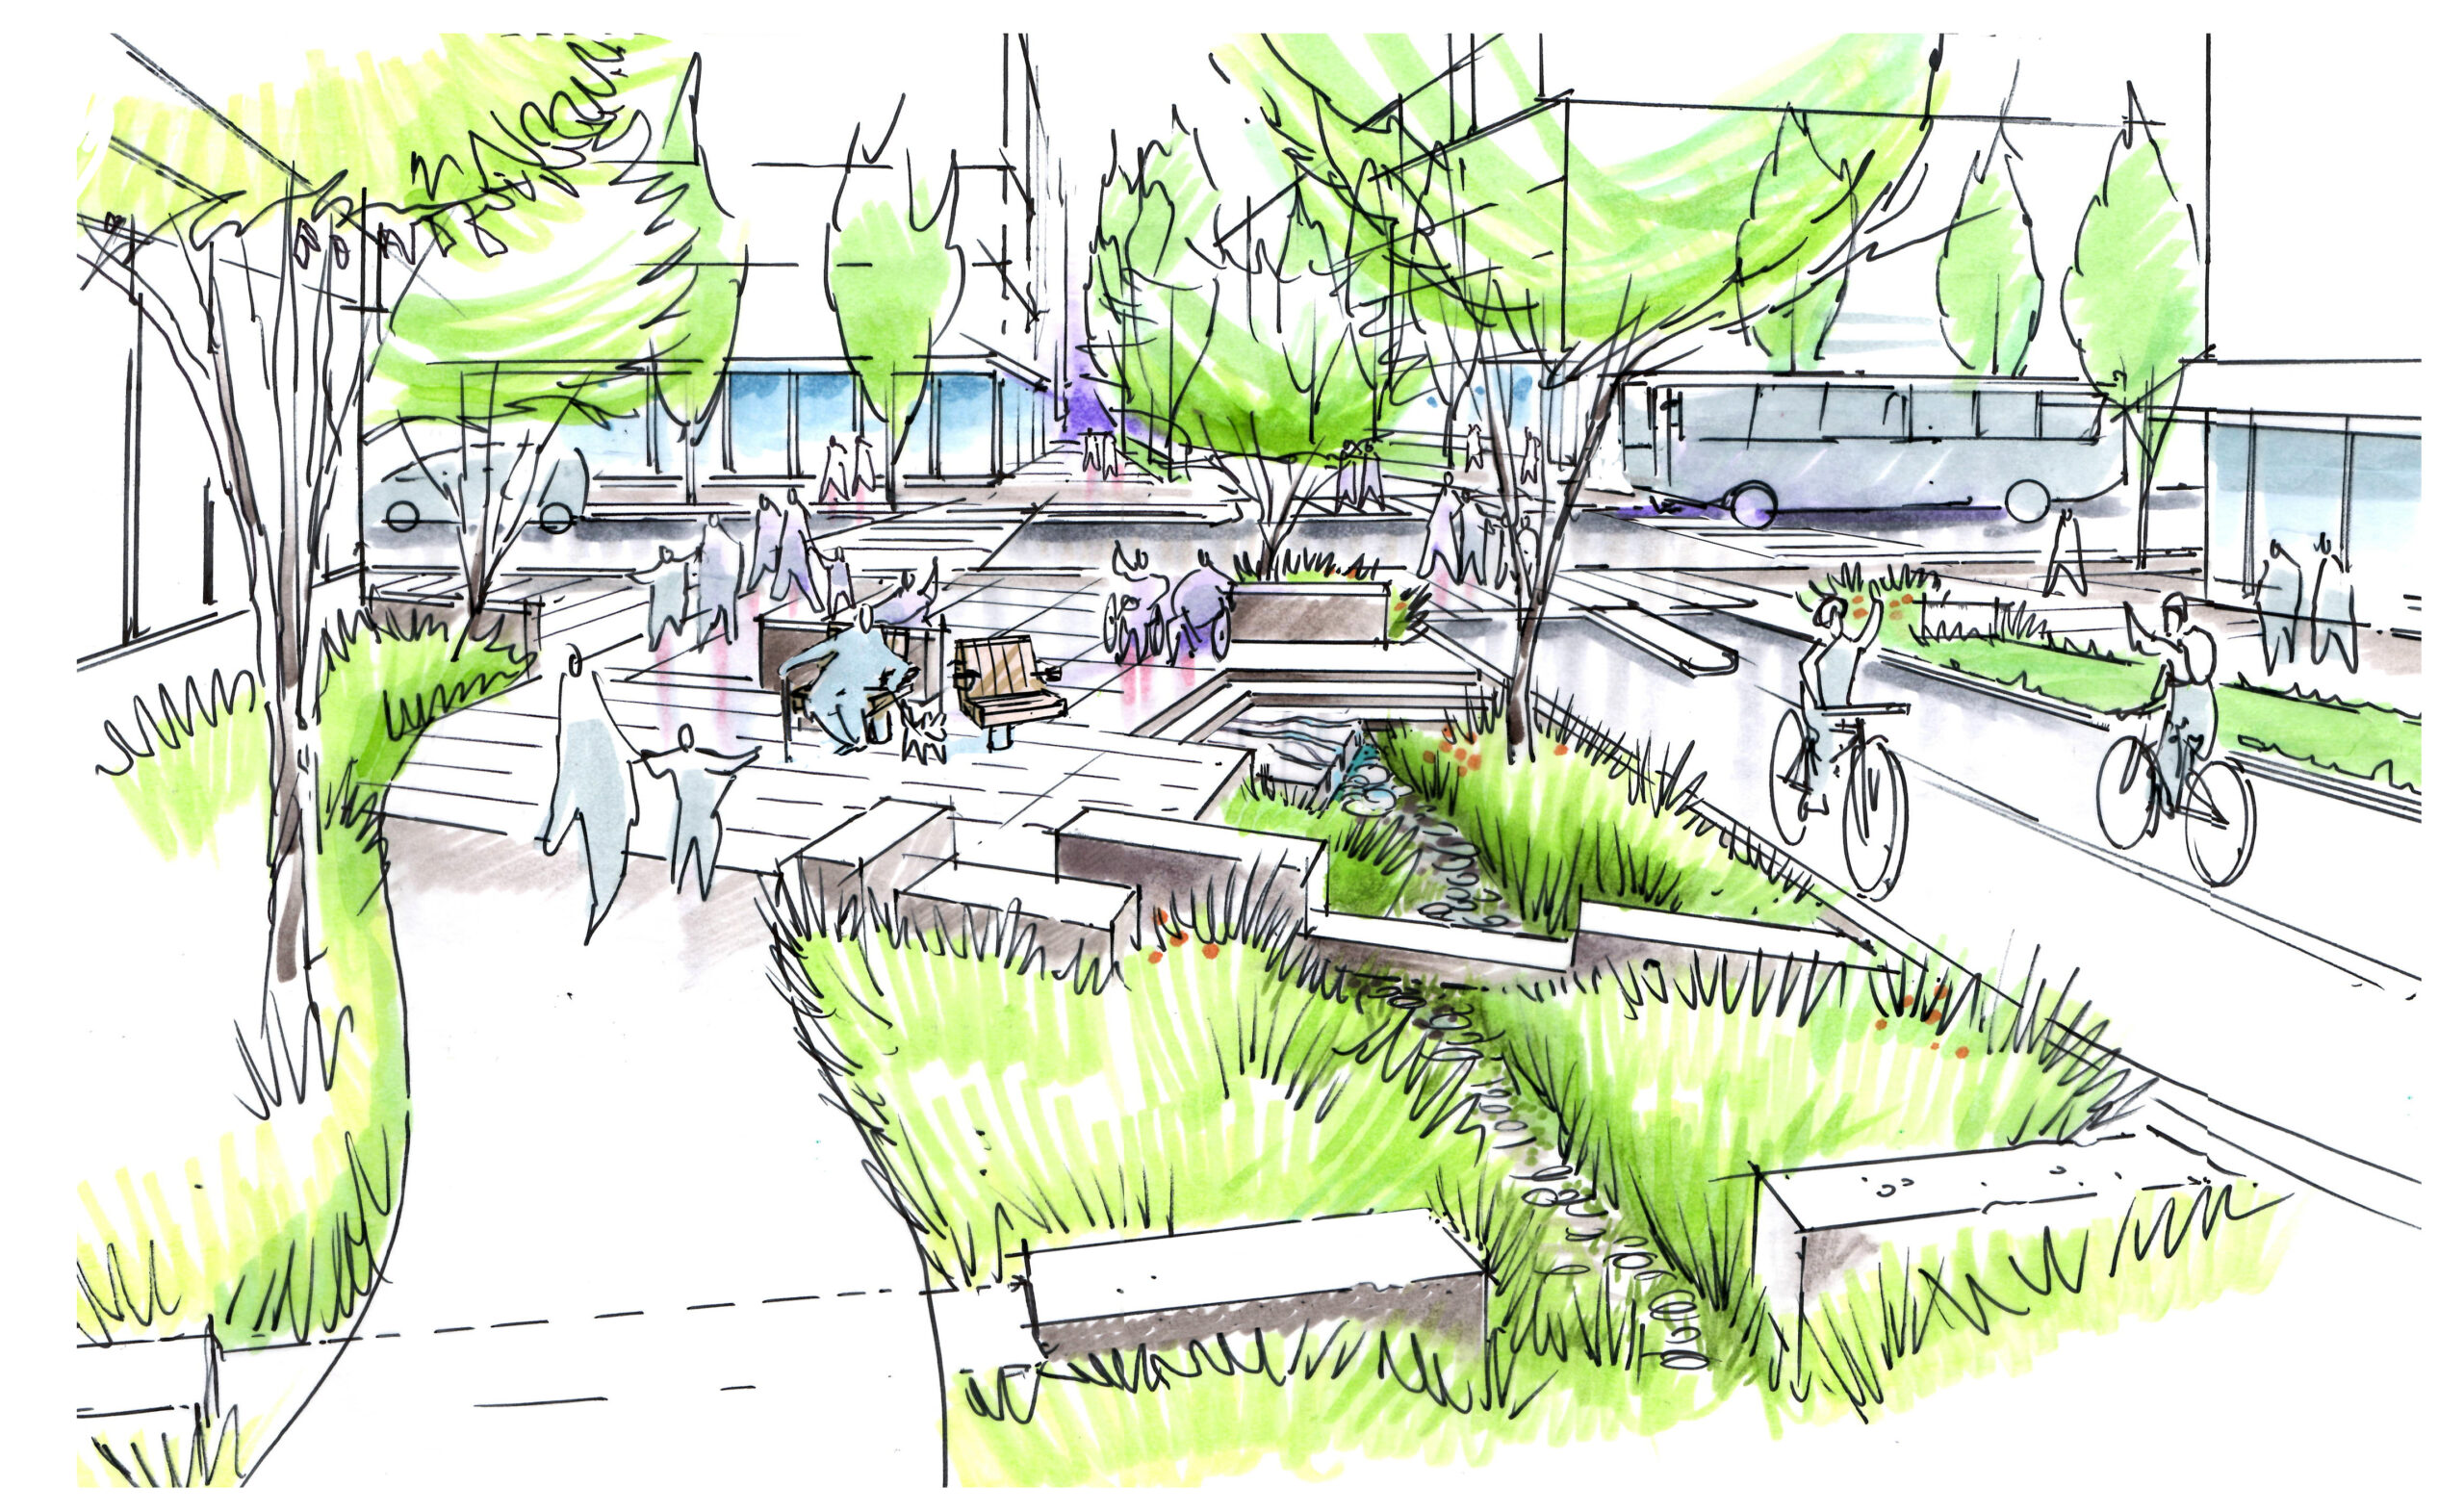 An illustrated design concept showing the rainway at St. George Street and Broadway, showing cyclists using the bike line and pedestrians walking along the sidewalk alongside gardens and rocky streambed